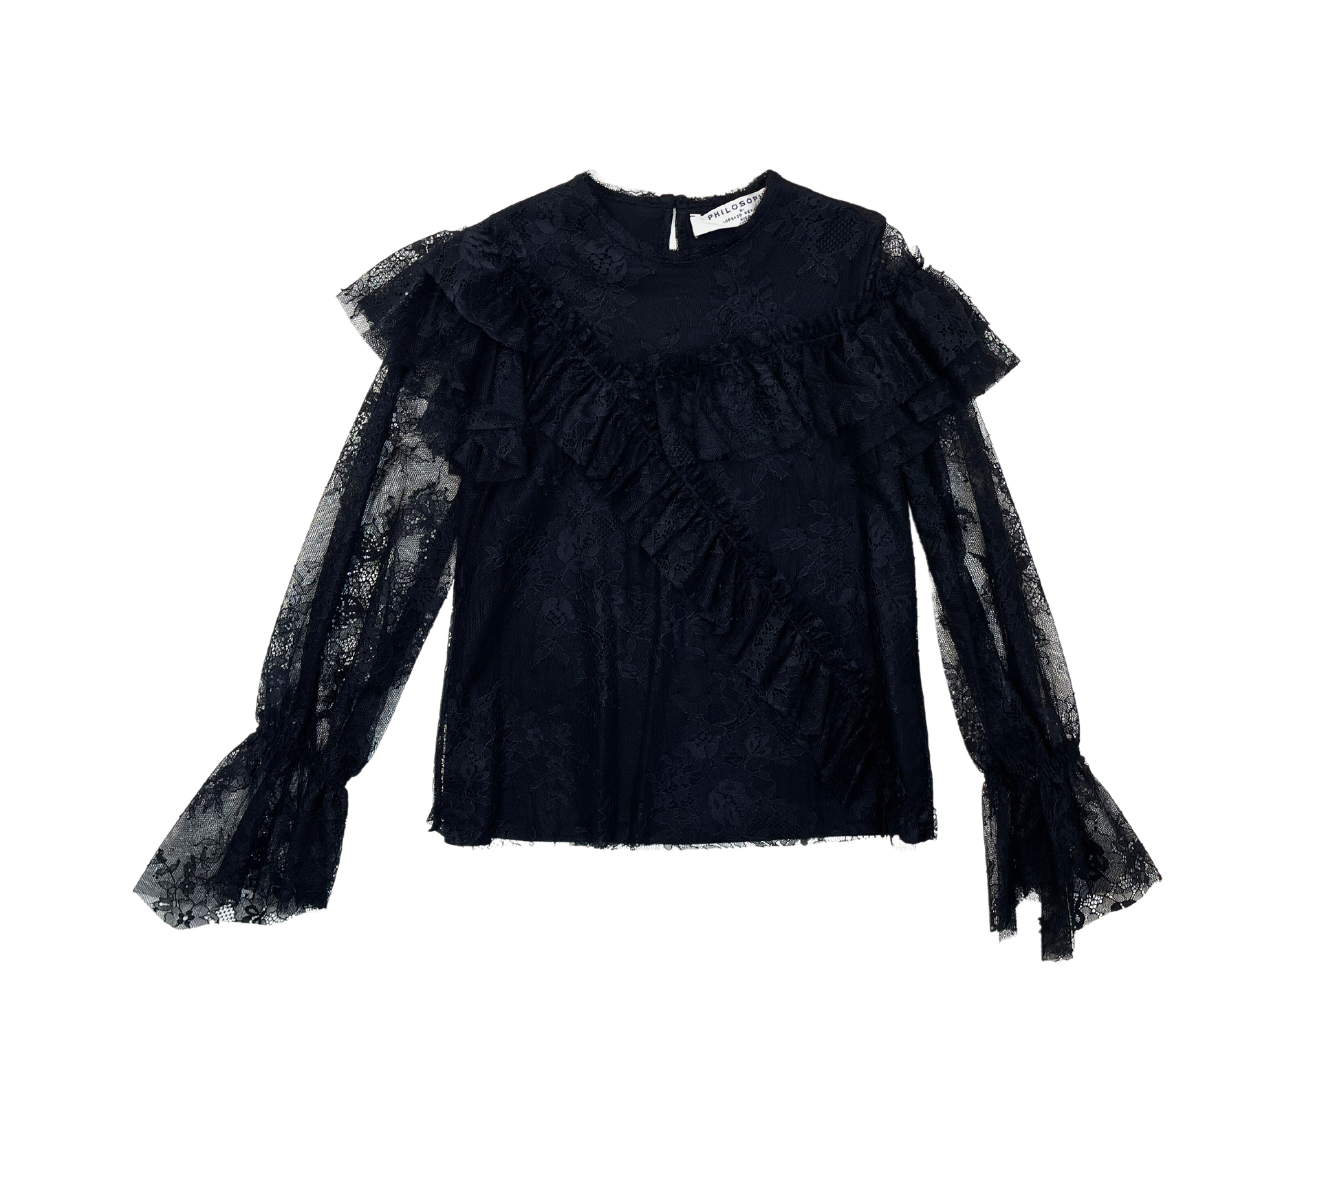 PHILOSOPHY DI LORENZO - Black lace blouse - 6 years old